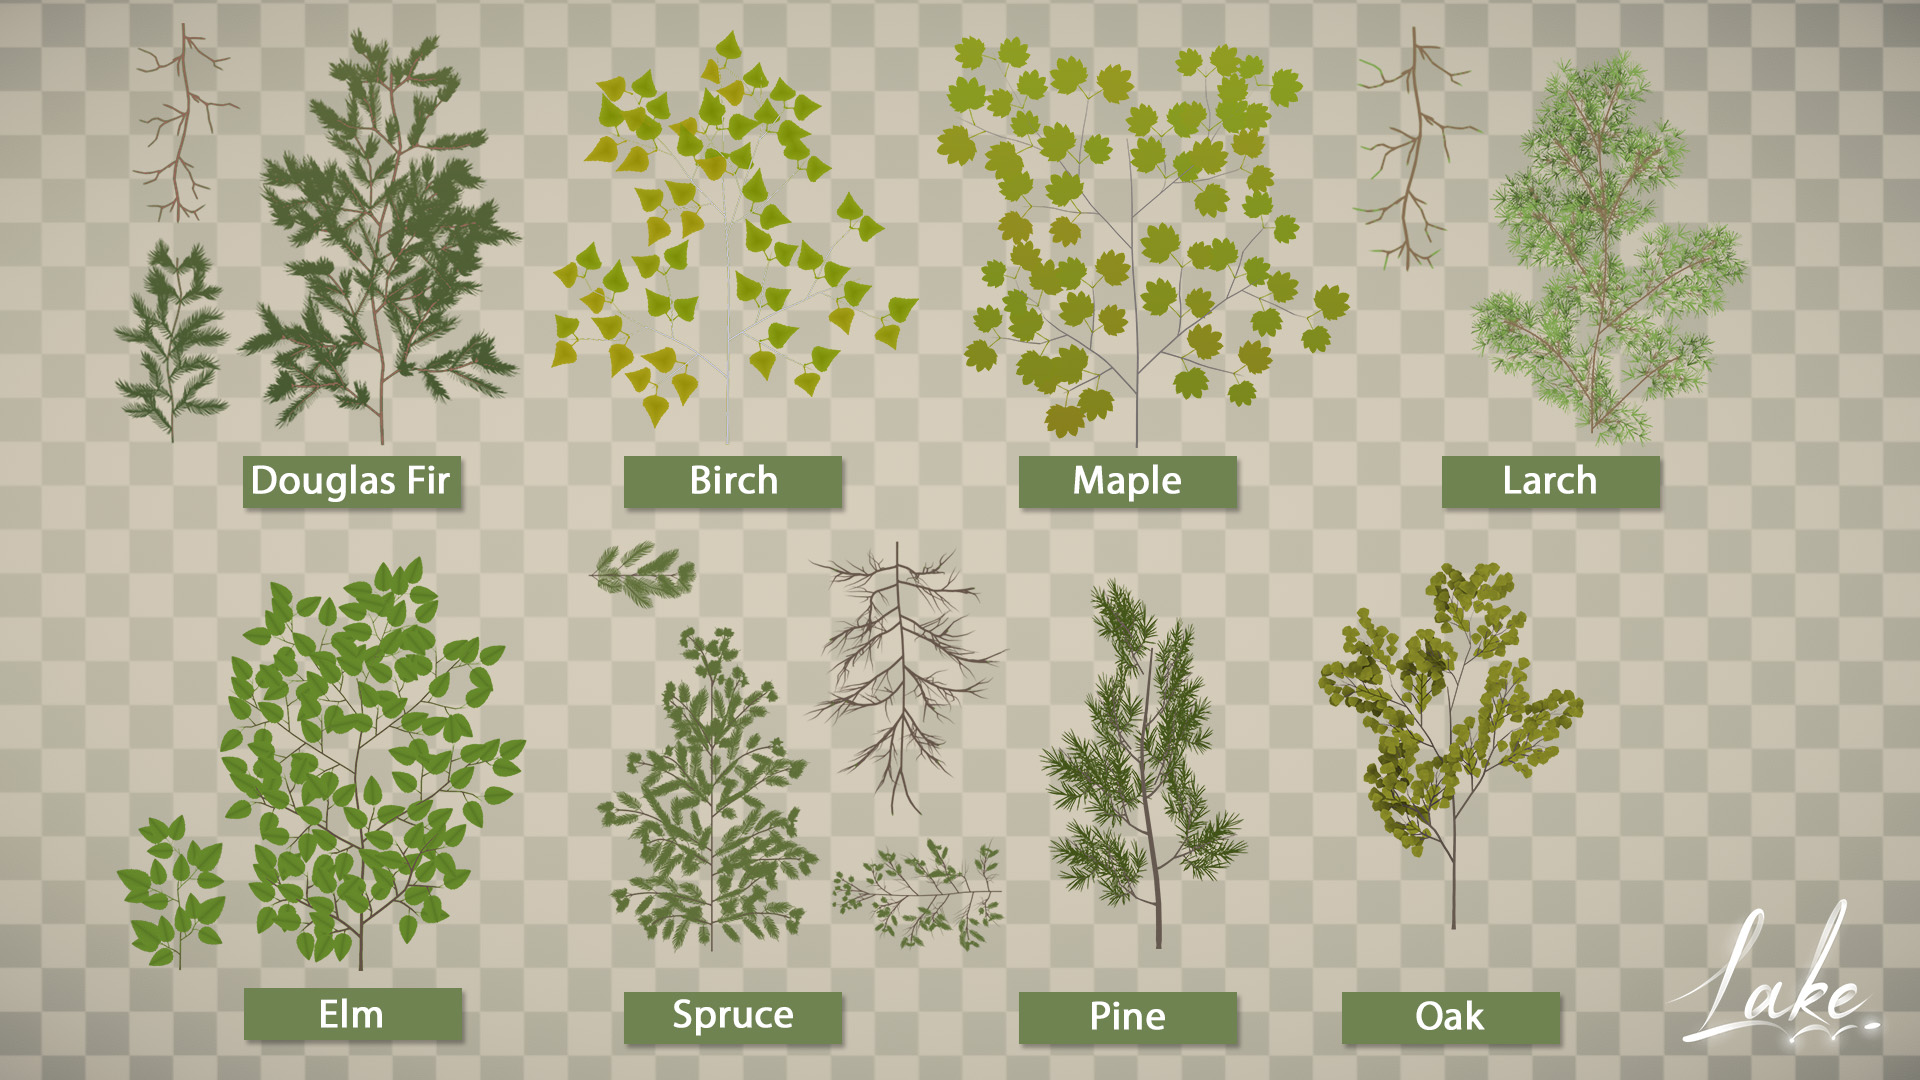 Different tree leaves (Douglas Fir, birch, maple, larch, elm, spruce, pine and oak) are laid down side by side